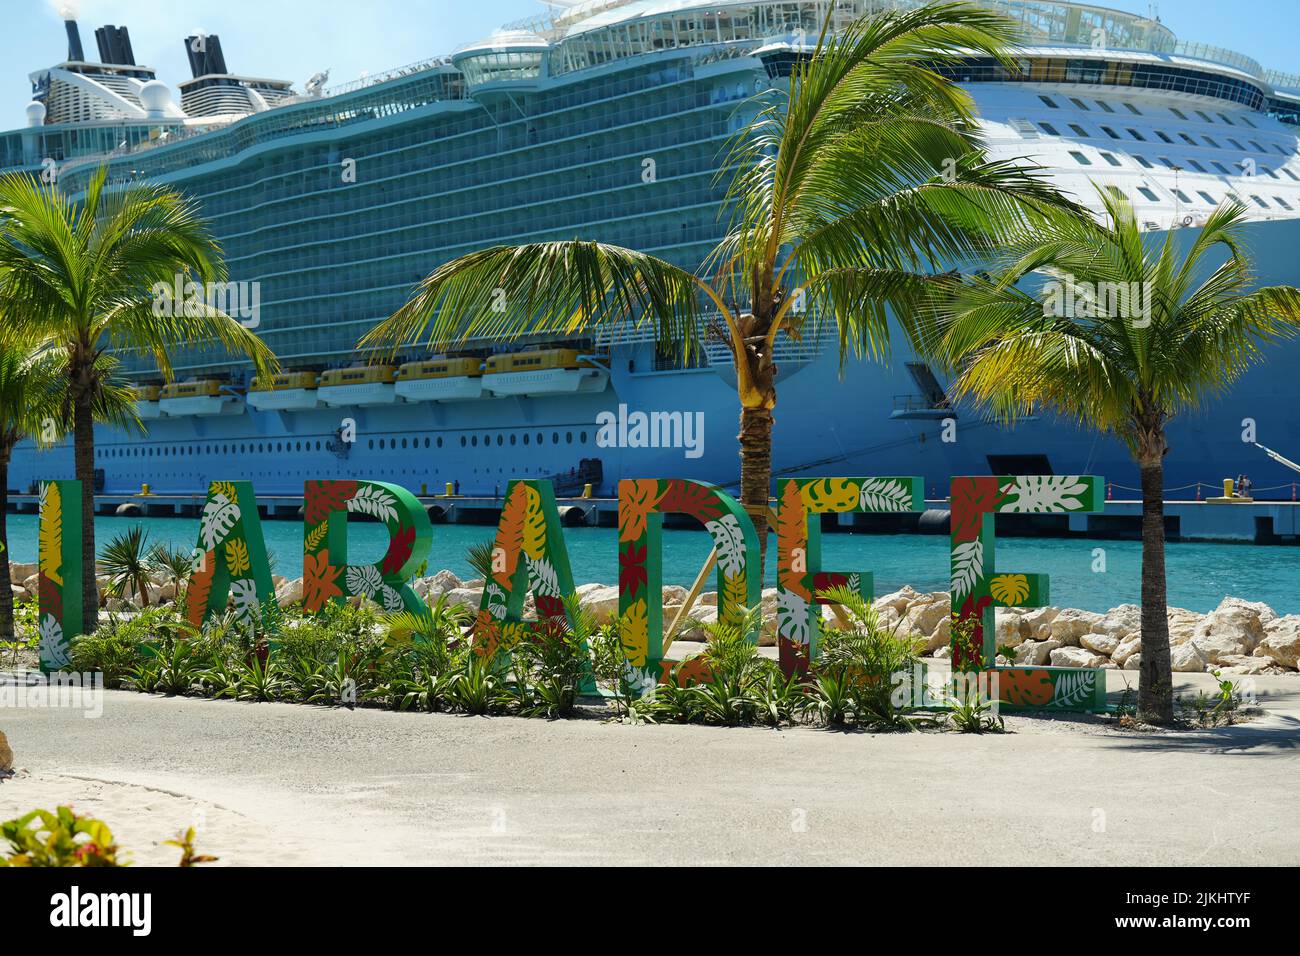 A selective focus shot of the Labadee beach sign with the Allure of the Seas ship in the background Stock Photo